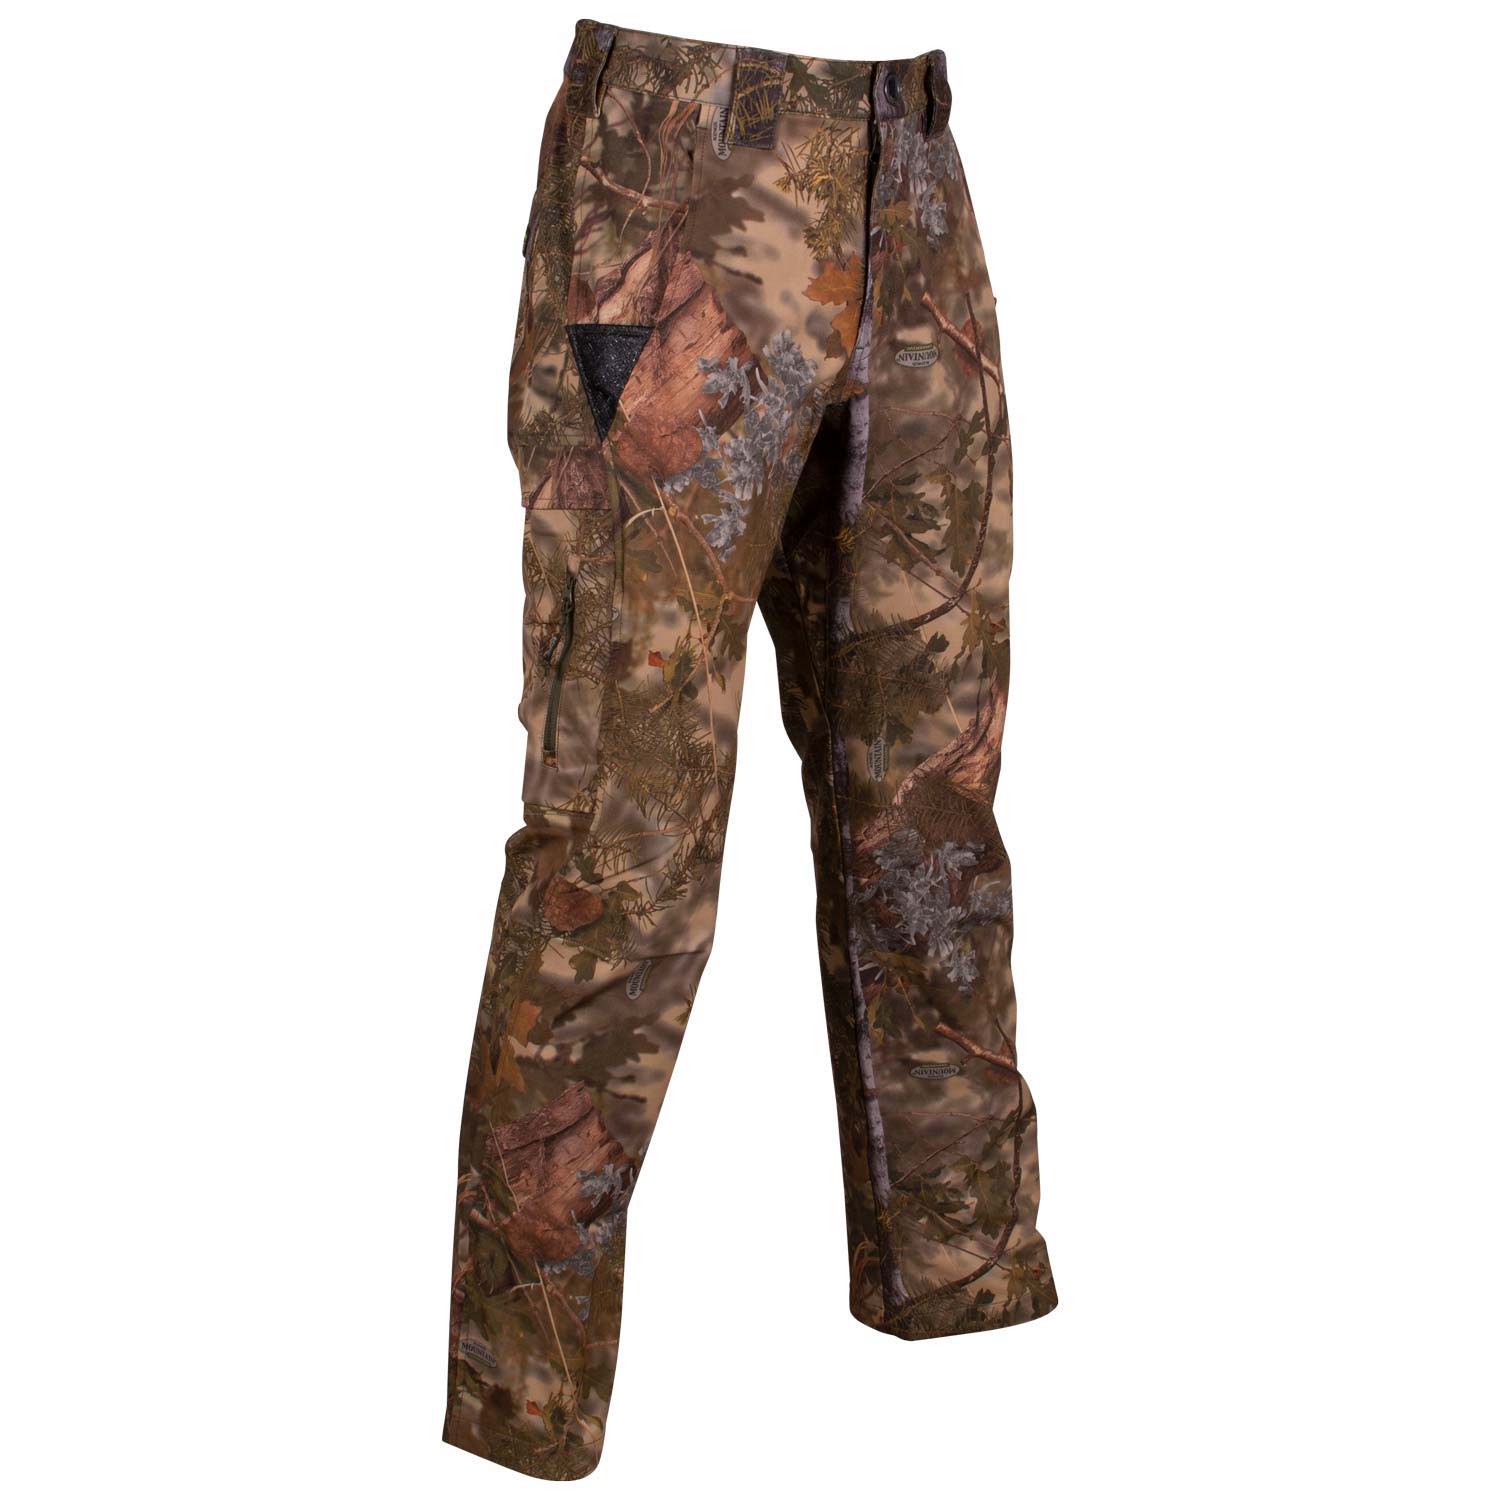 Hunting Pant Guide | King's Camo